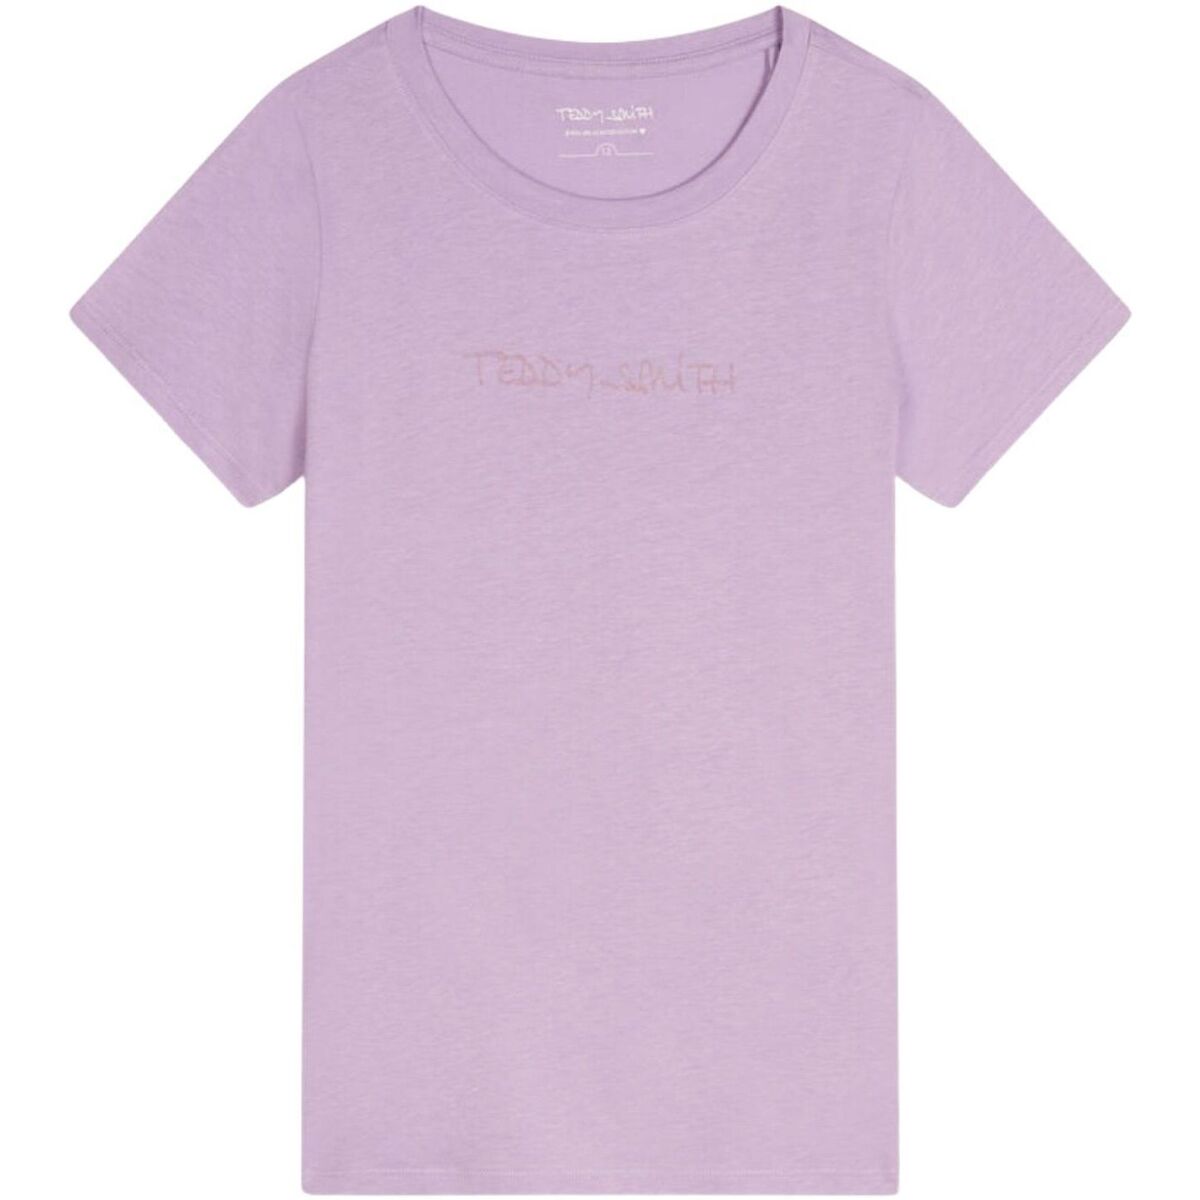 Teddy Smith Violet T-shirt manches courtes - T-TICIA 2 MC JR hWyhjT6A